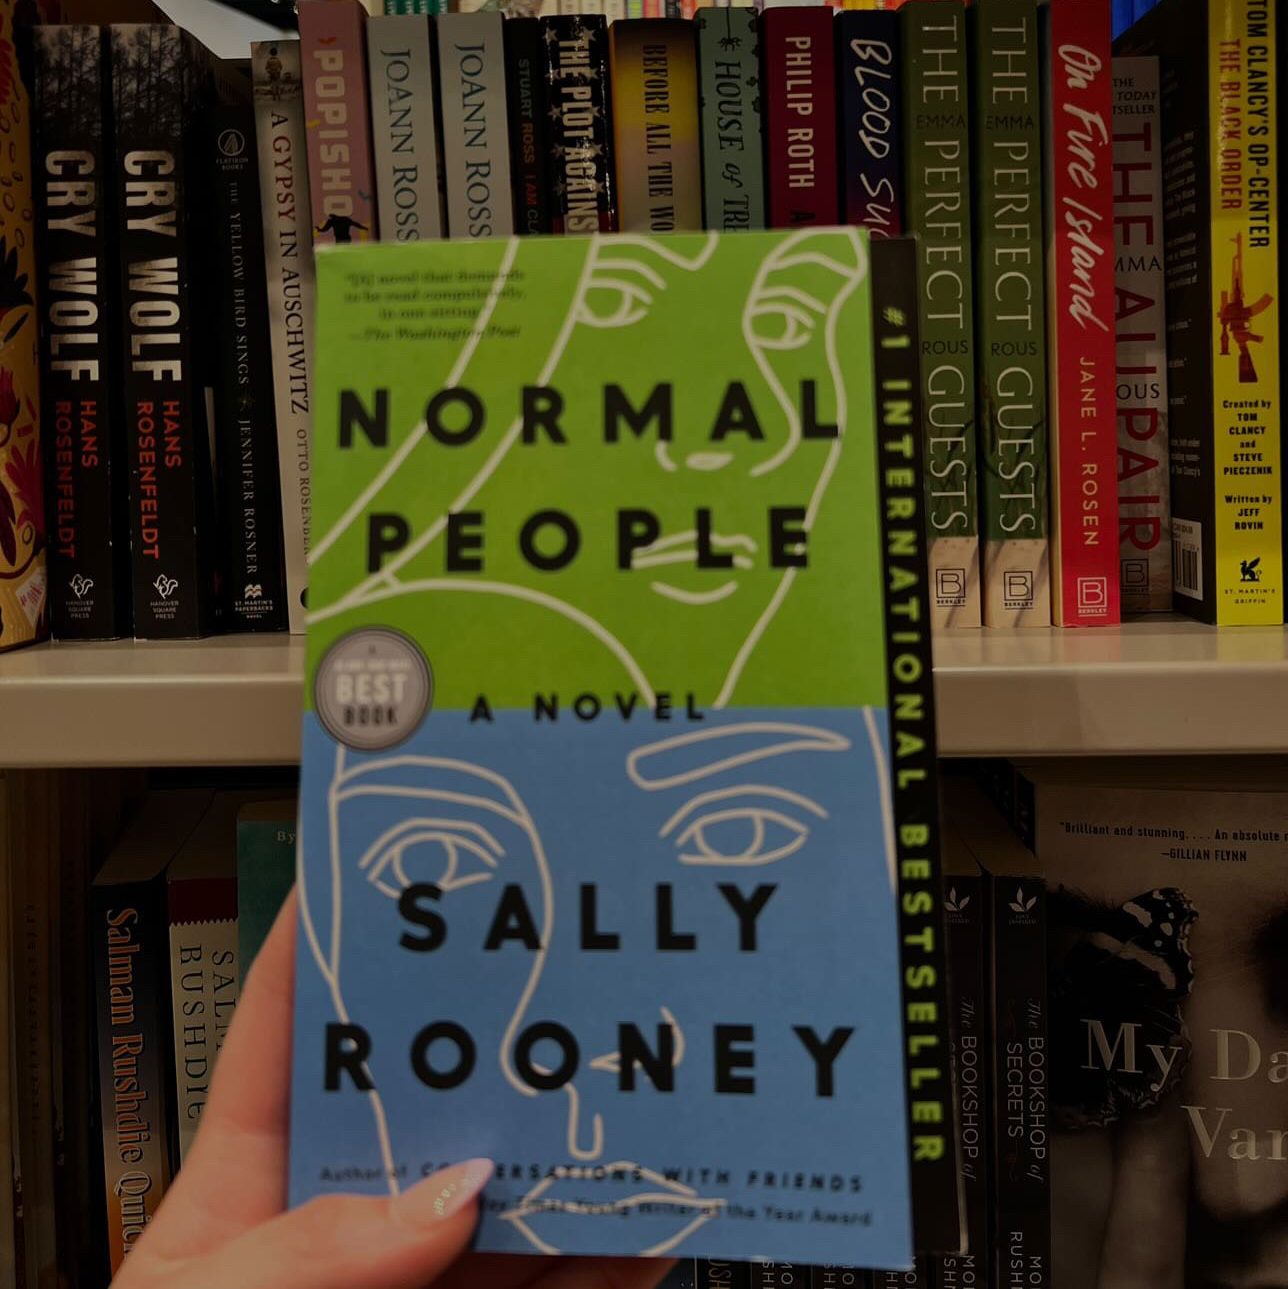 A copy of Normal People being help up in front of library bookshelves